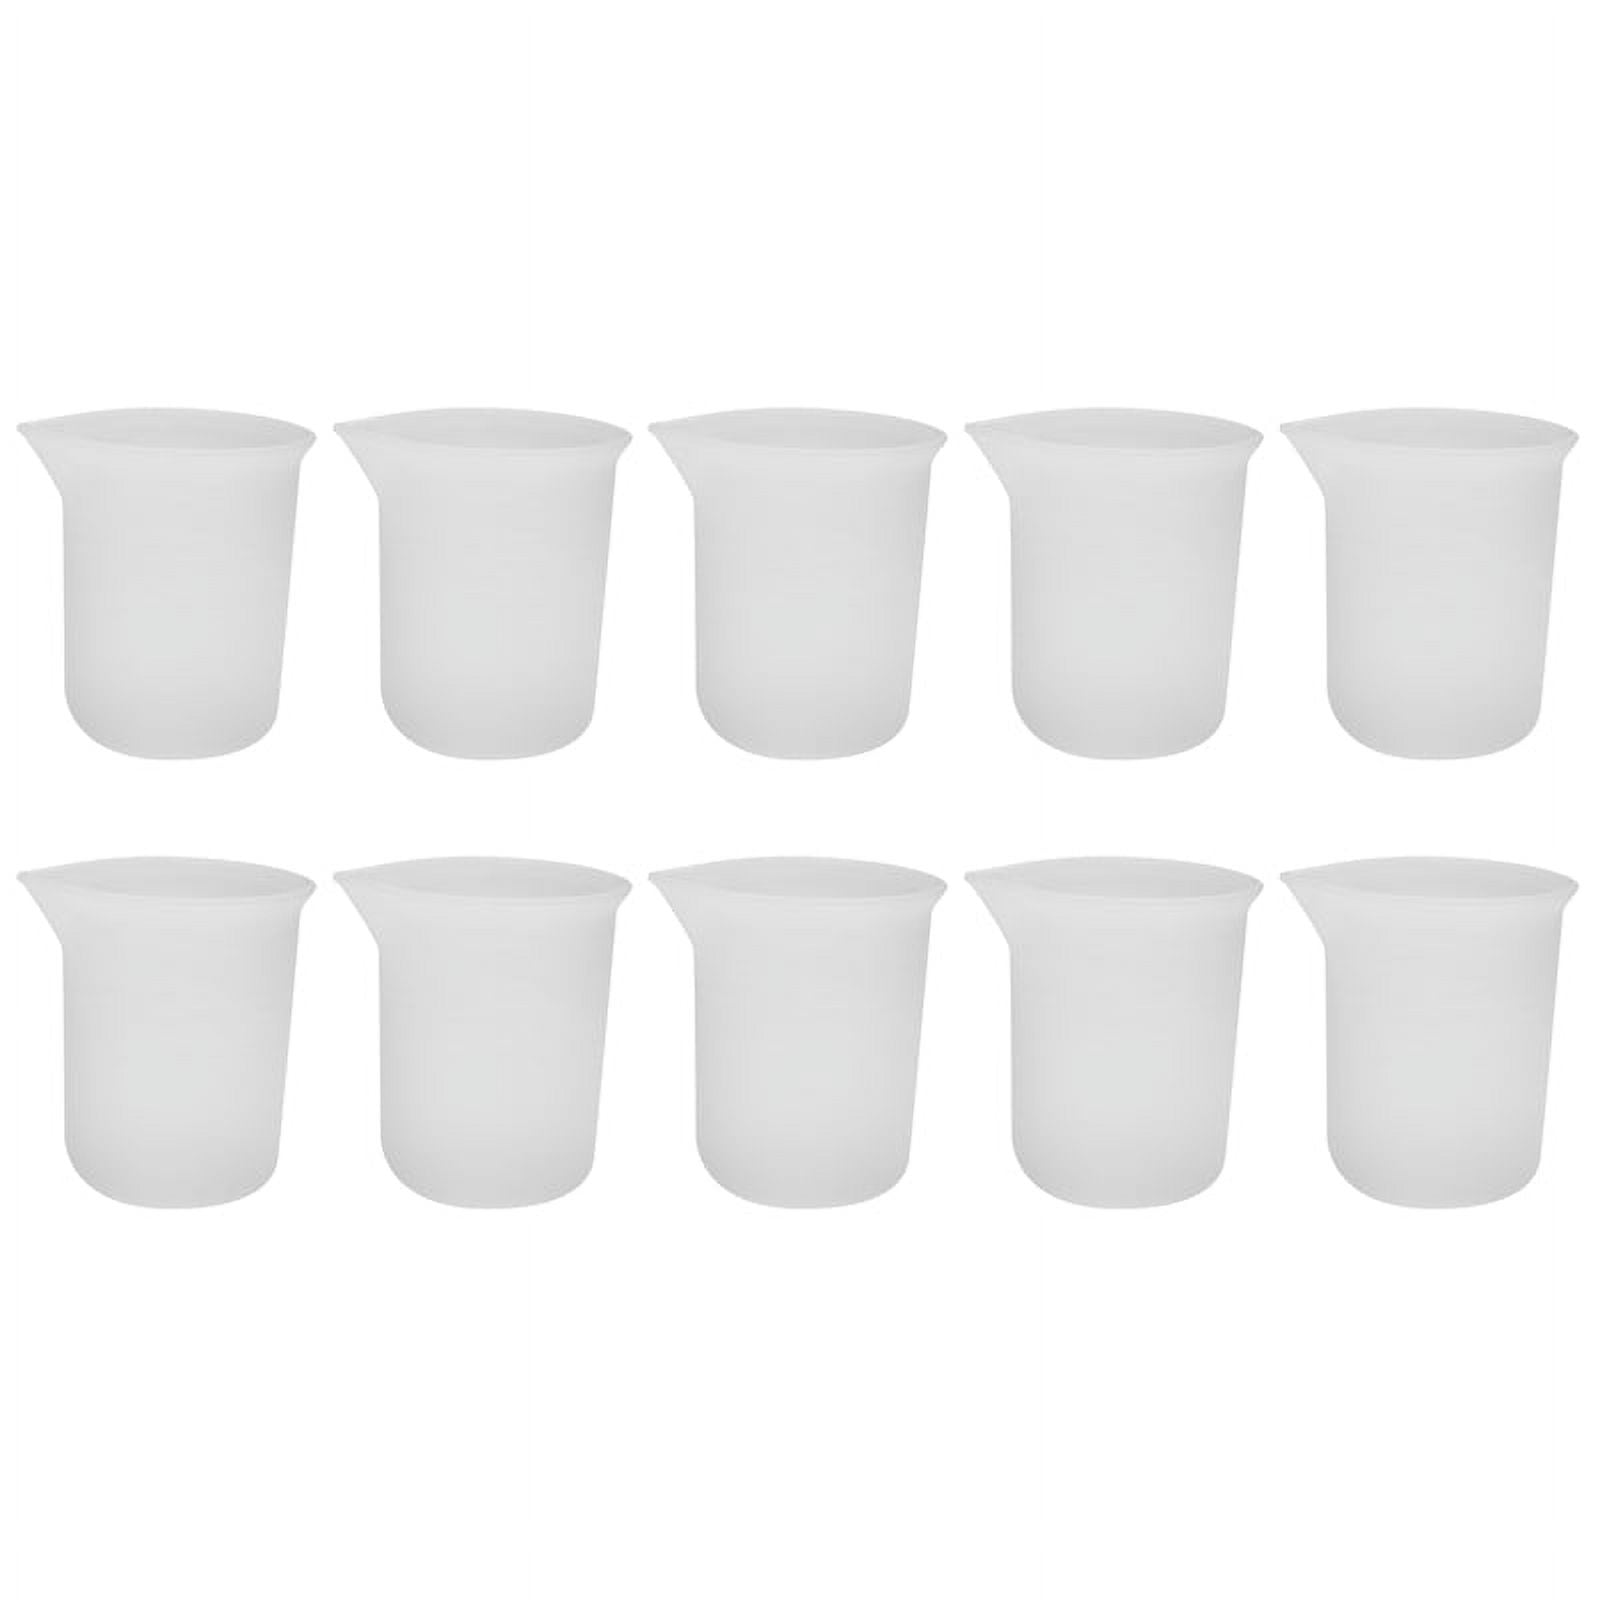 TCP Global 20 Ounce (600ml) Disposable Flexible Clear Graduated Plastic  Mixing Cups - Box of 25 Cups & 25 Mixing Sticks - Use for Paint, Resin,  Epoxy, Art, Kitchen - Measuring Ratios 2-1, 3-1, 4-1, ML 